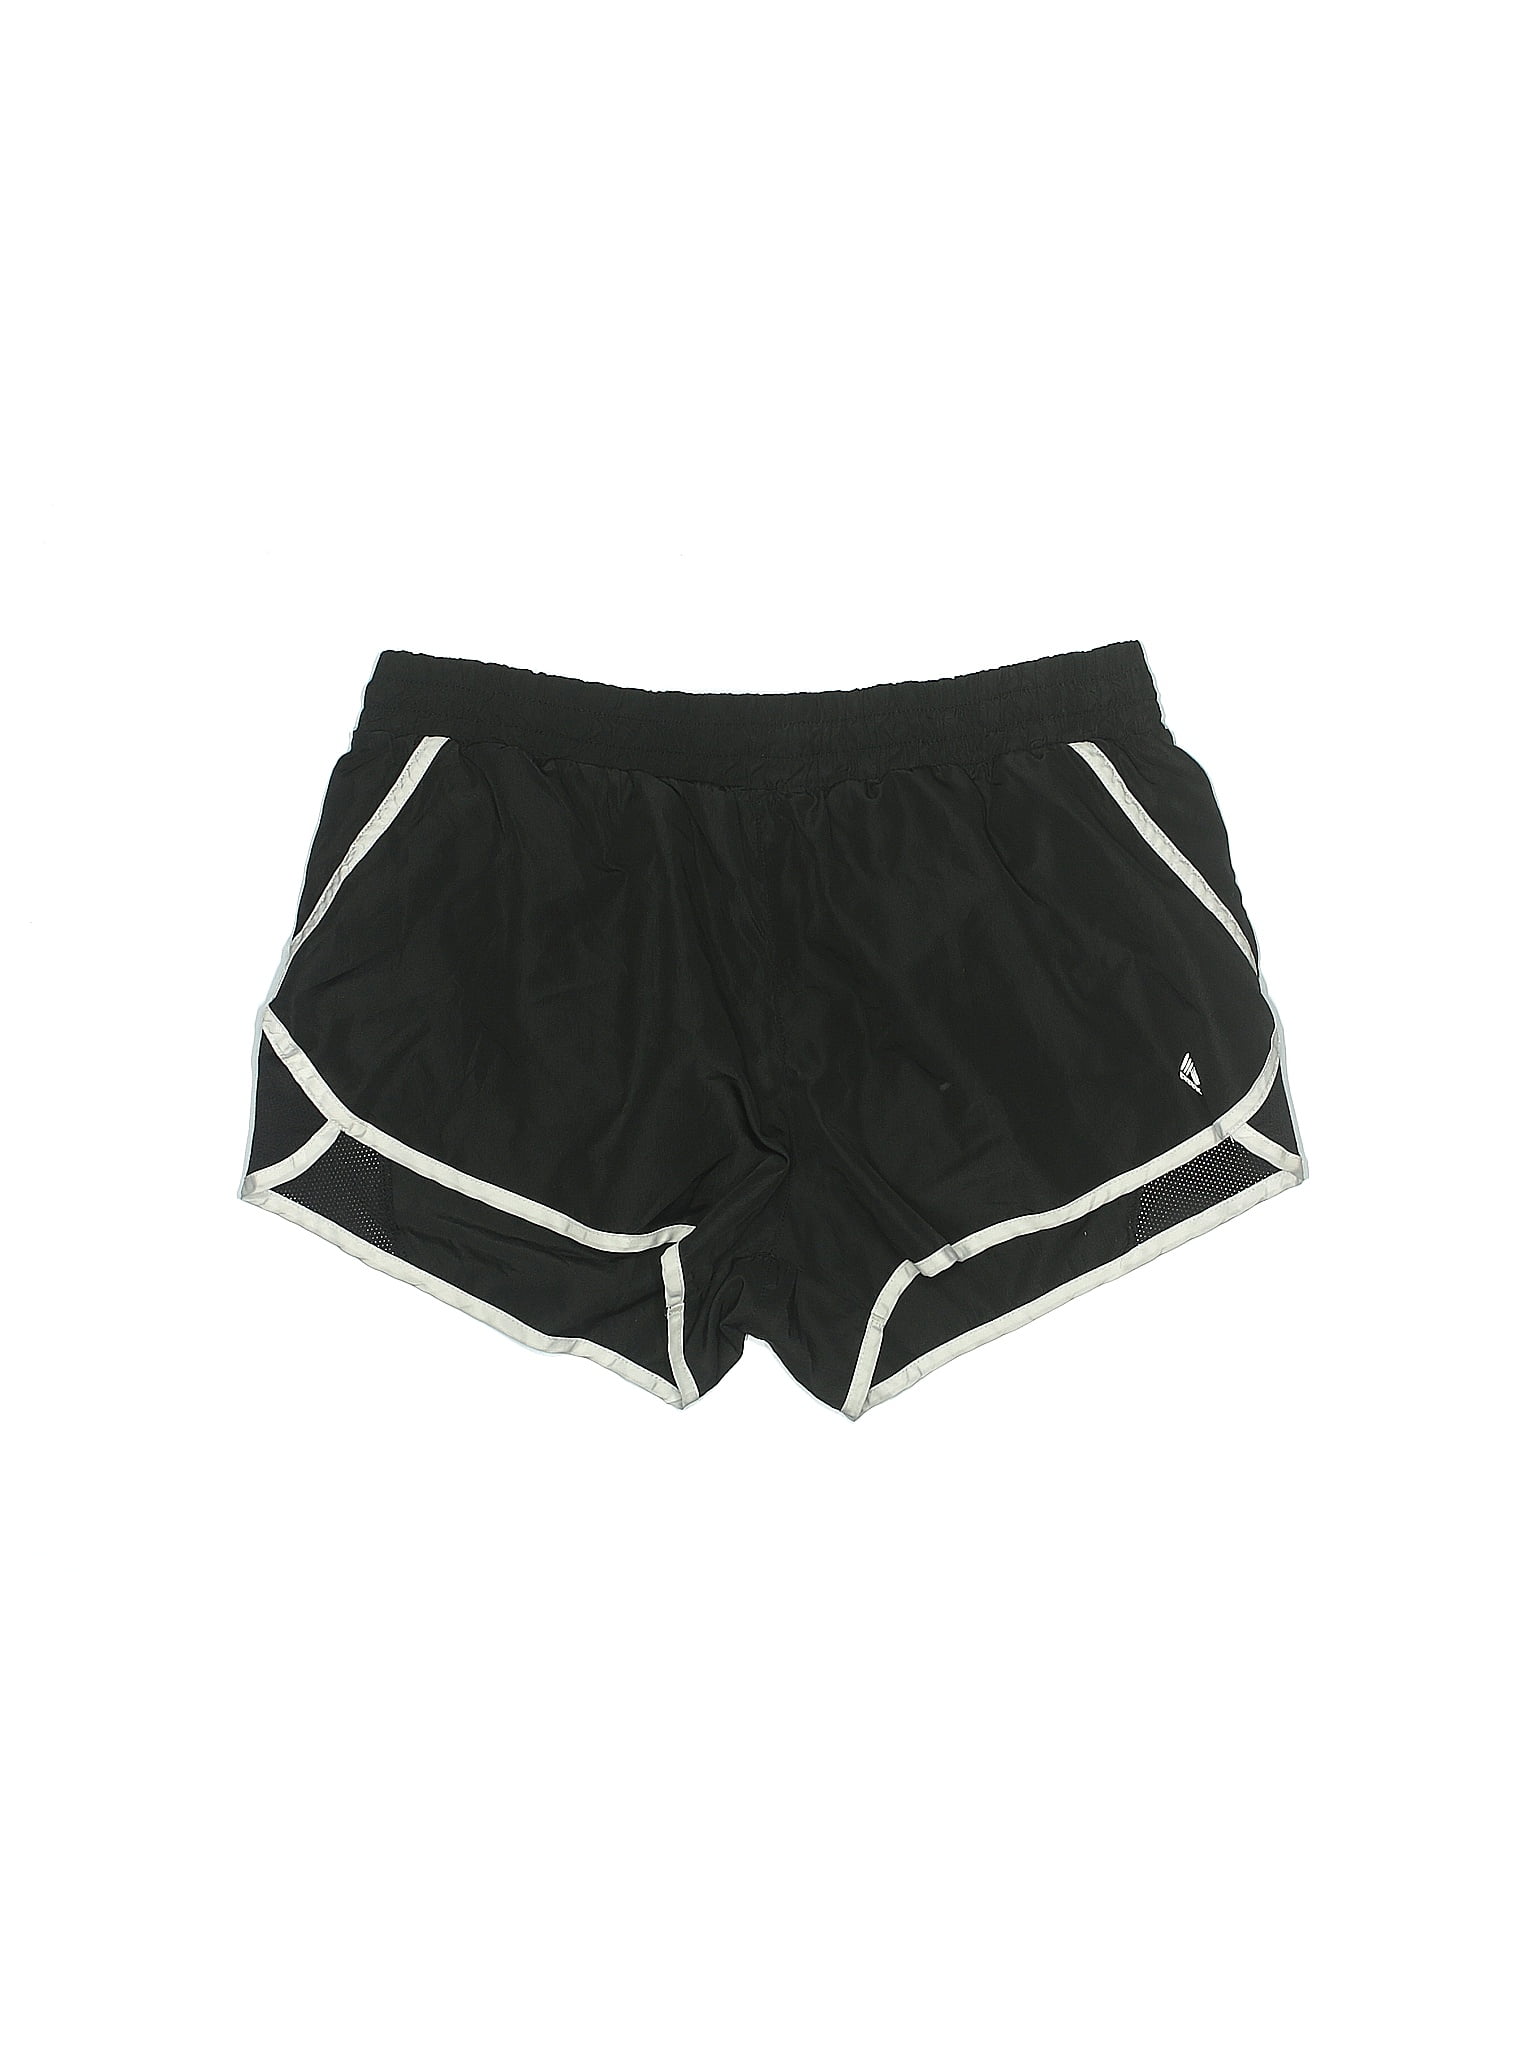 RBX 100% Polyester Color Block Solid Black Athletic Shorts Size XL - 63%  off